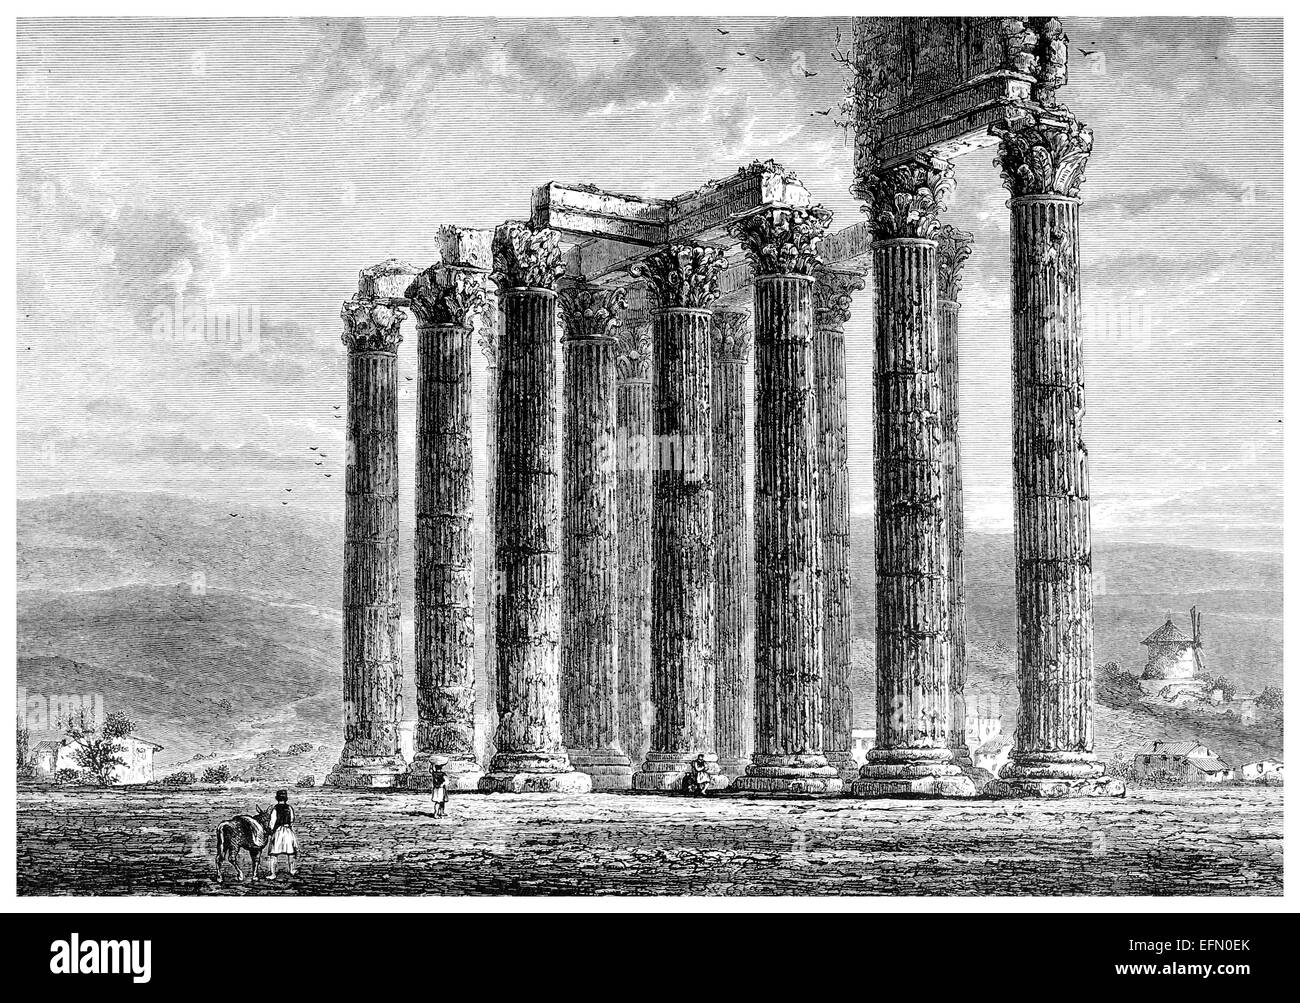 Victorian engraving of the ruins of an ancient Greek temple. Digitally restored image from a mid-19th century Encyclopaedia. Stock Photo